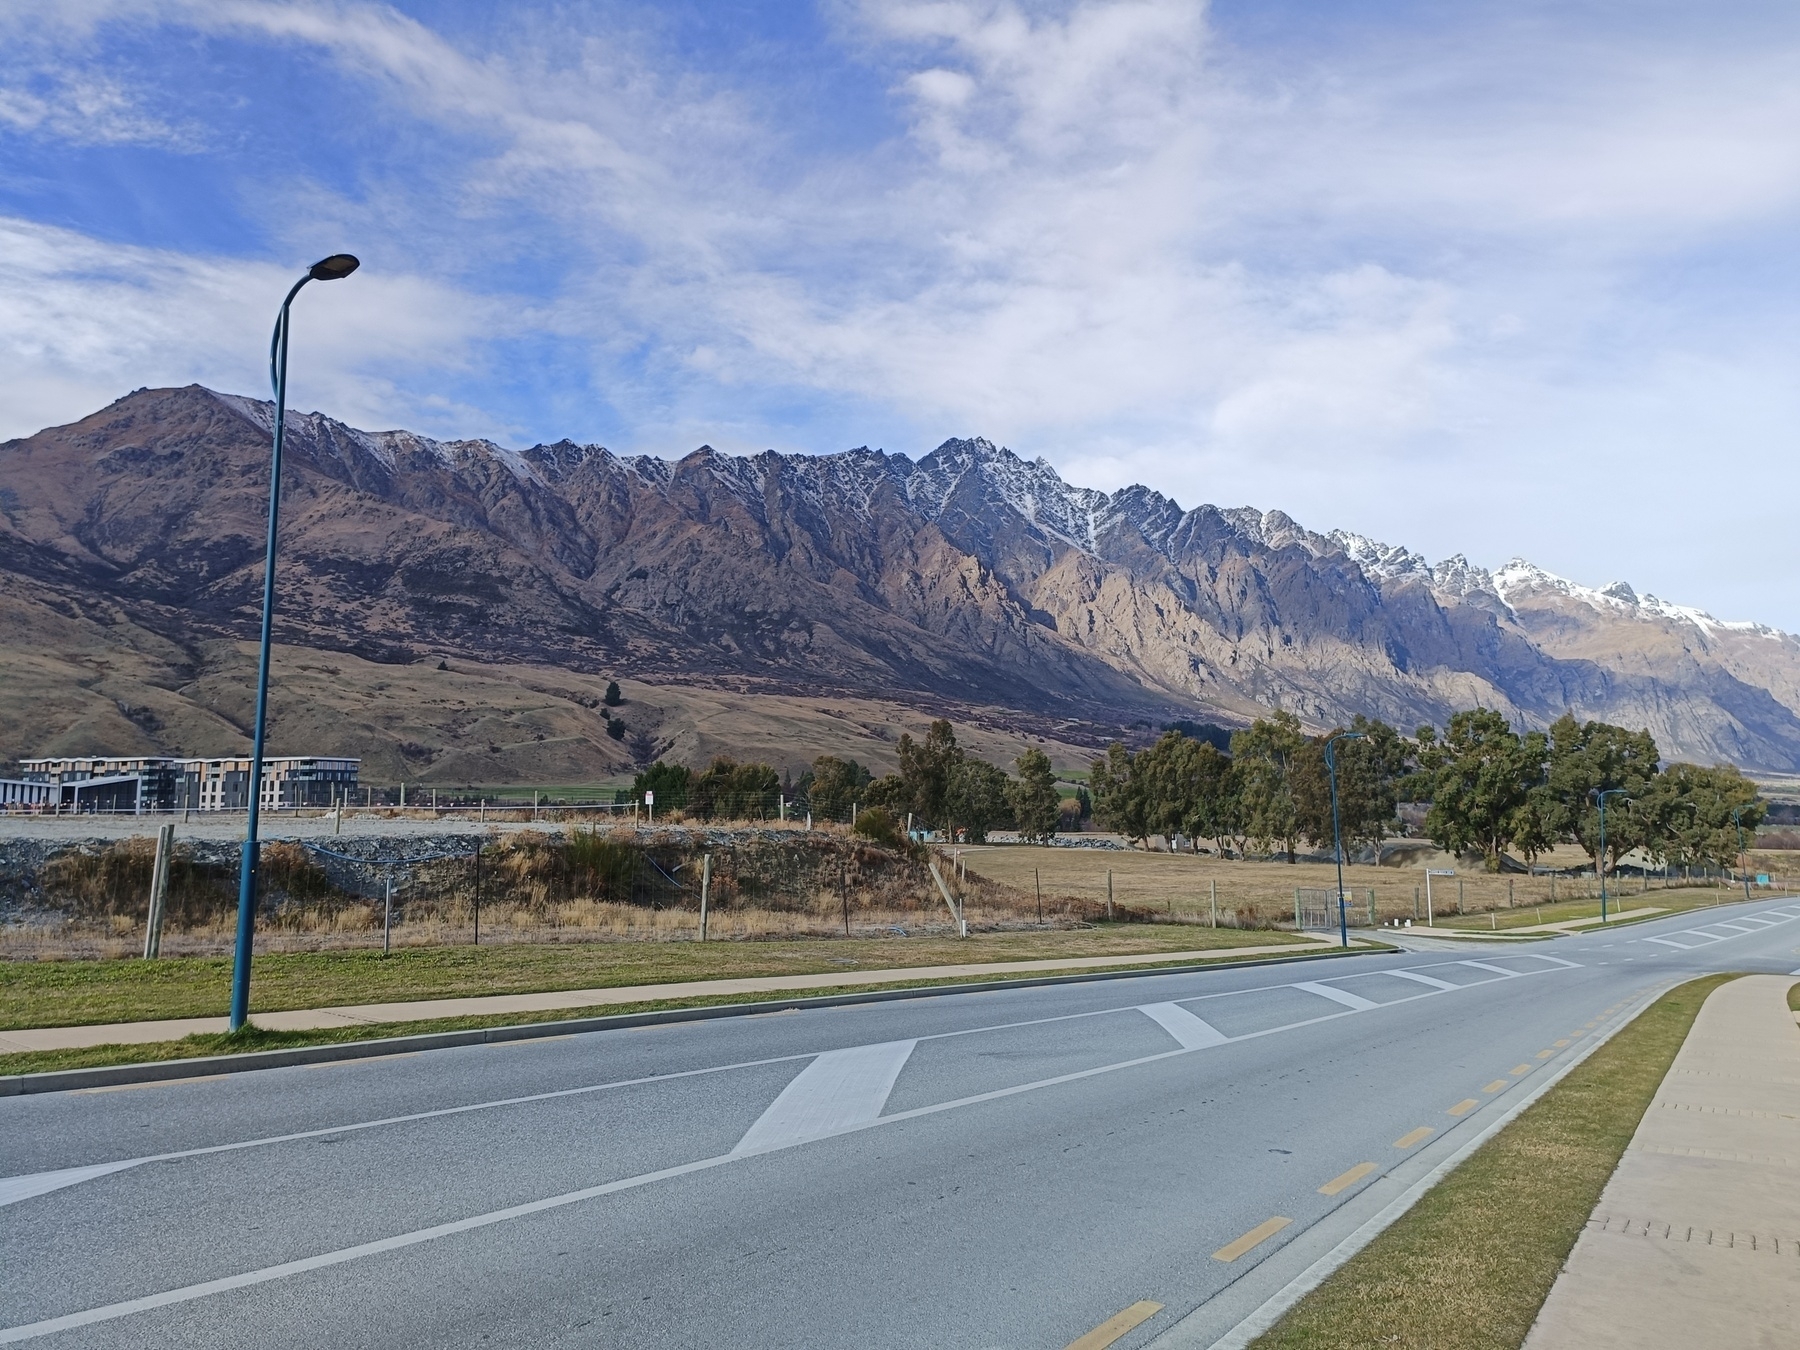 North face of the Remarkables range showing little snow.